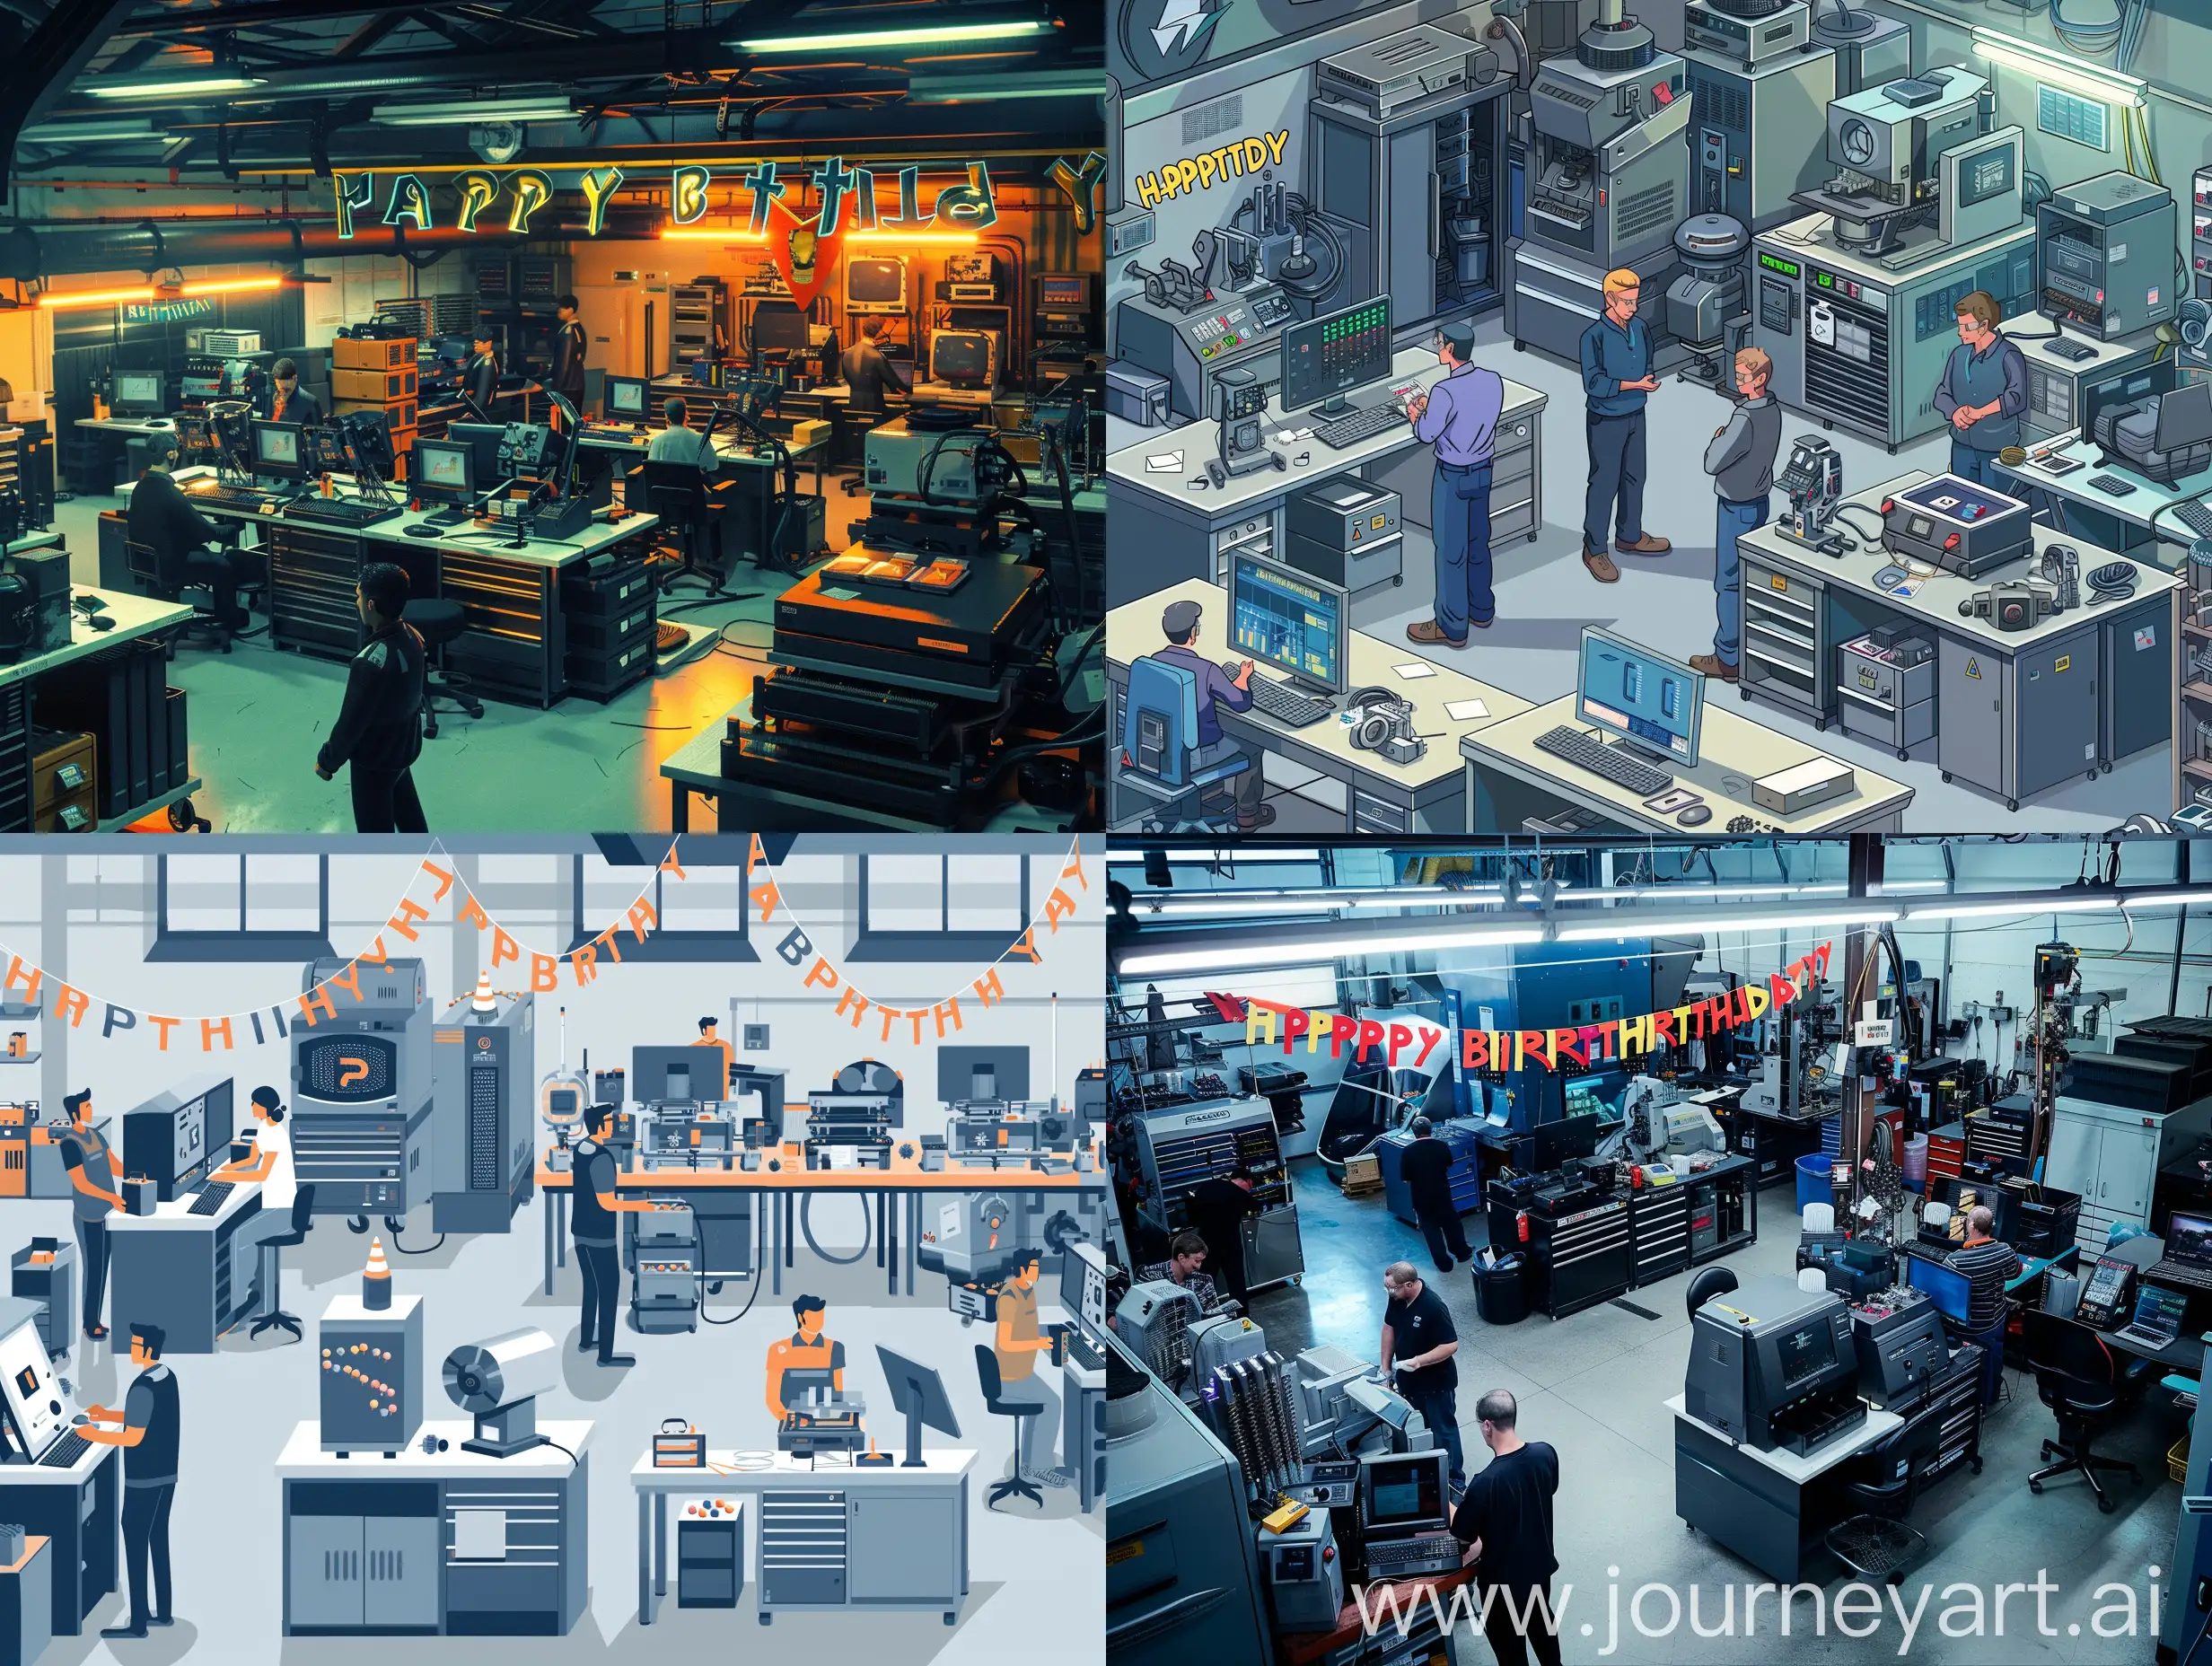 A garage full of machines and computers with 4 male workers and 1 female worker. Add a Garland saying "Happy Birthday"